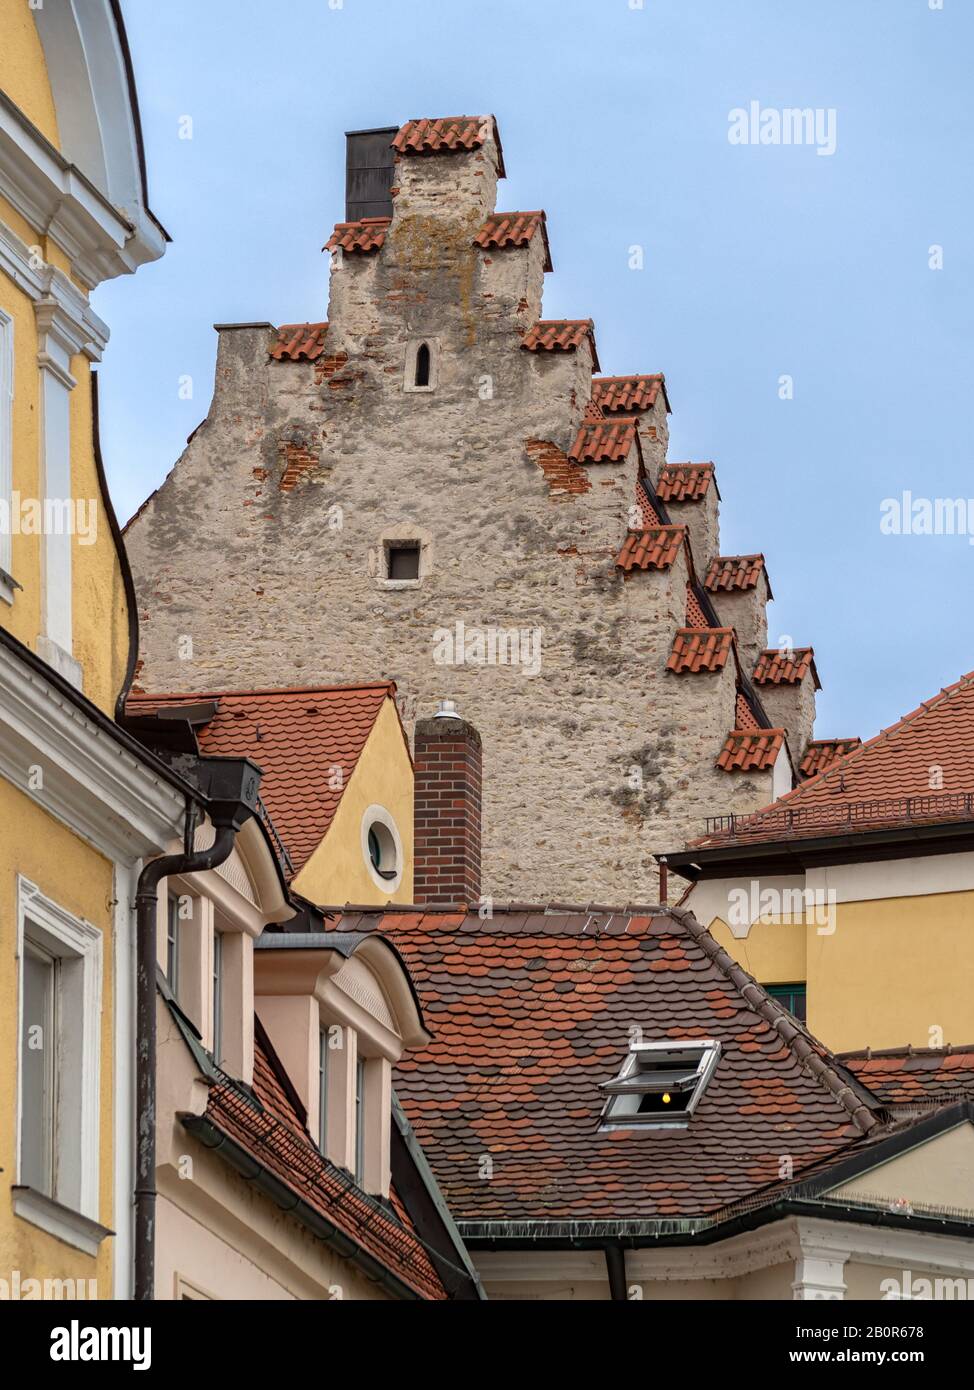 REGENSBURG, GERMANY - 07/11/2019:  Gabled roofs on houses in the Old Town Stock Photo